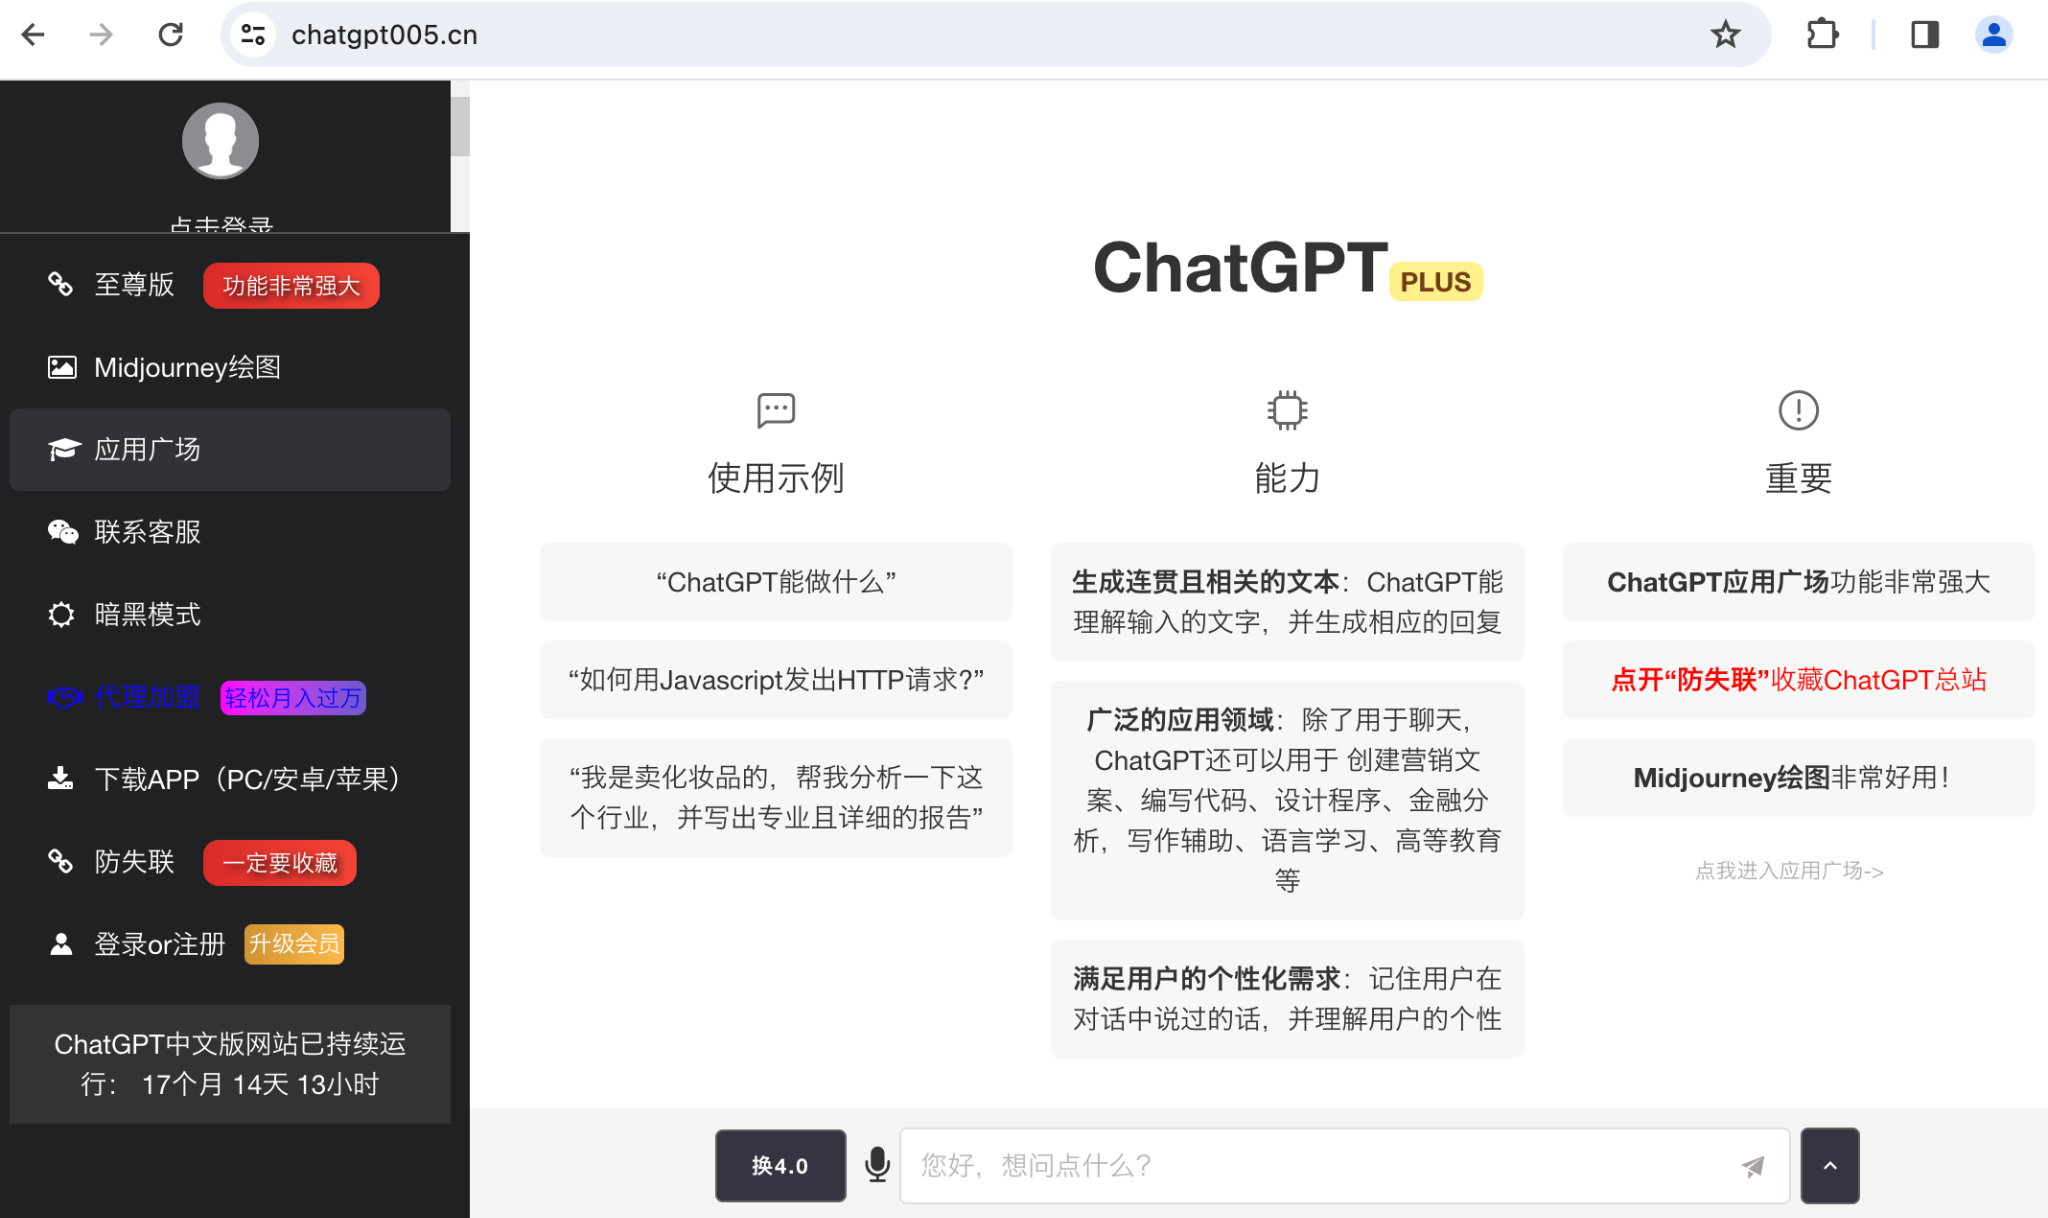 The image shows a website interface for "ChatGPT Plus", laid out primarily in Chinese text. On the left side there is a vertical navigation menu with multiple options, including user journey and FAQ. The main part of the page highlights three sections regarding different access levels or features available in ChatGPT Plus: express queue, general access, and member settings. Each section is accompanied by a description underneath in simplified Chinese. 